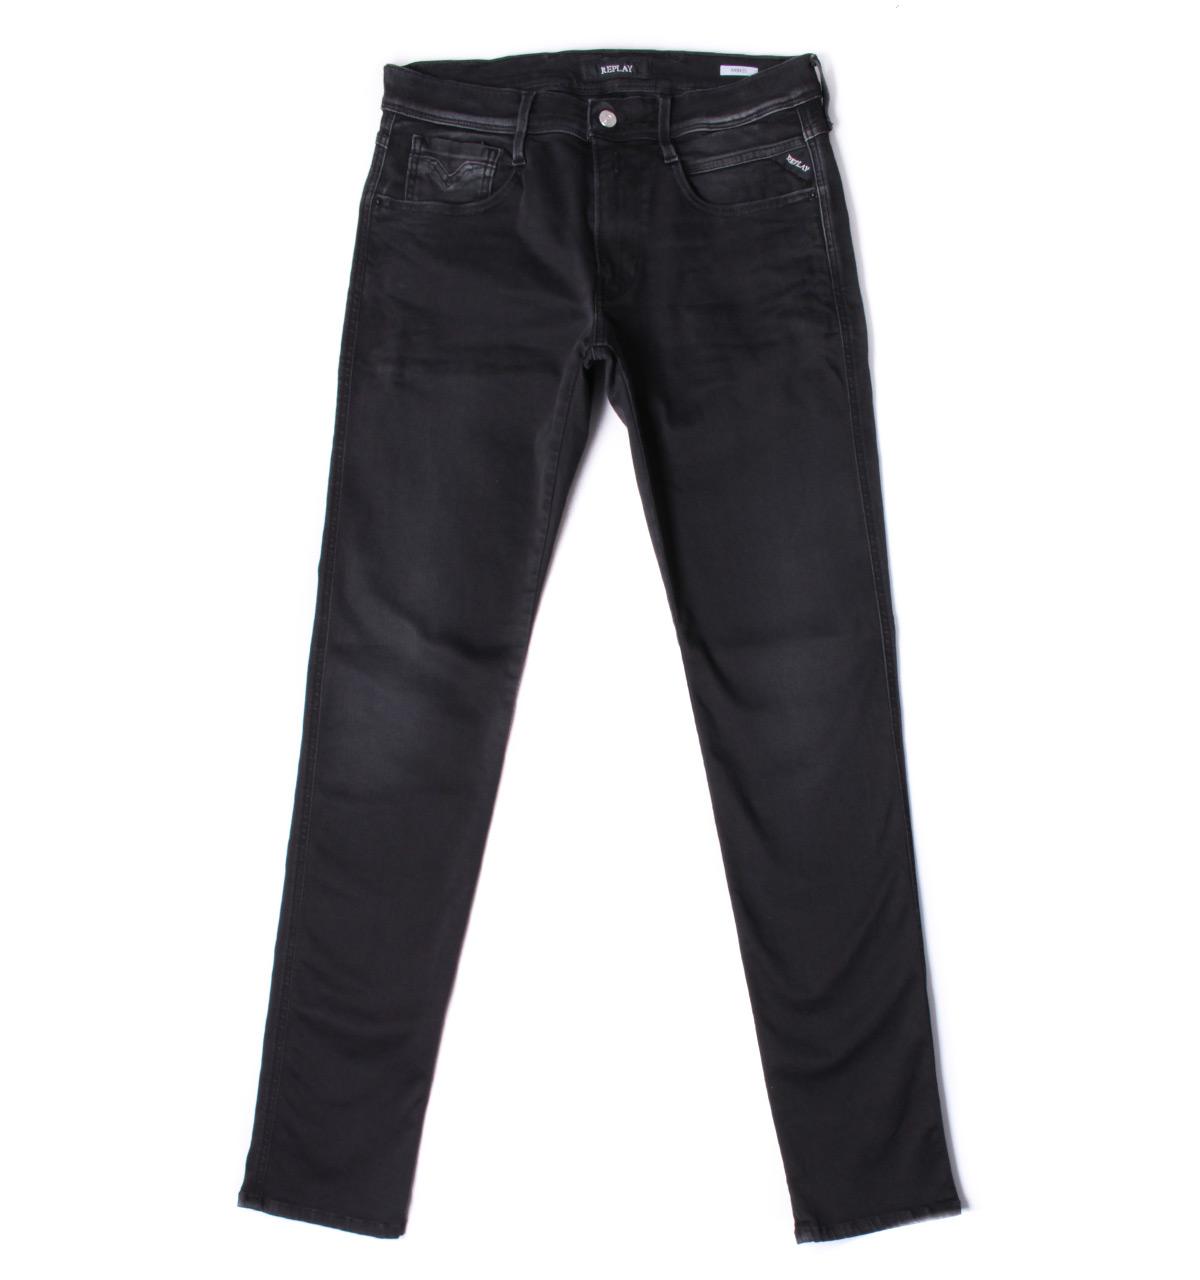 Lyst - Replay Anbass Hyperflex Black Skinny Fit Jeans in Black for Men